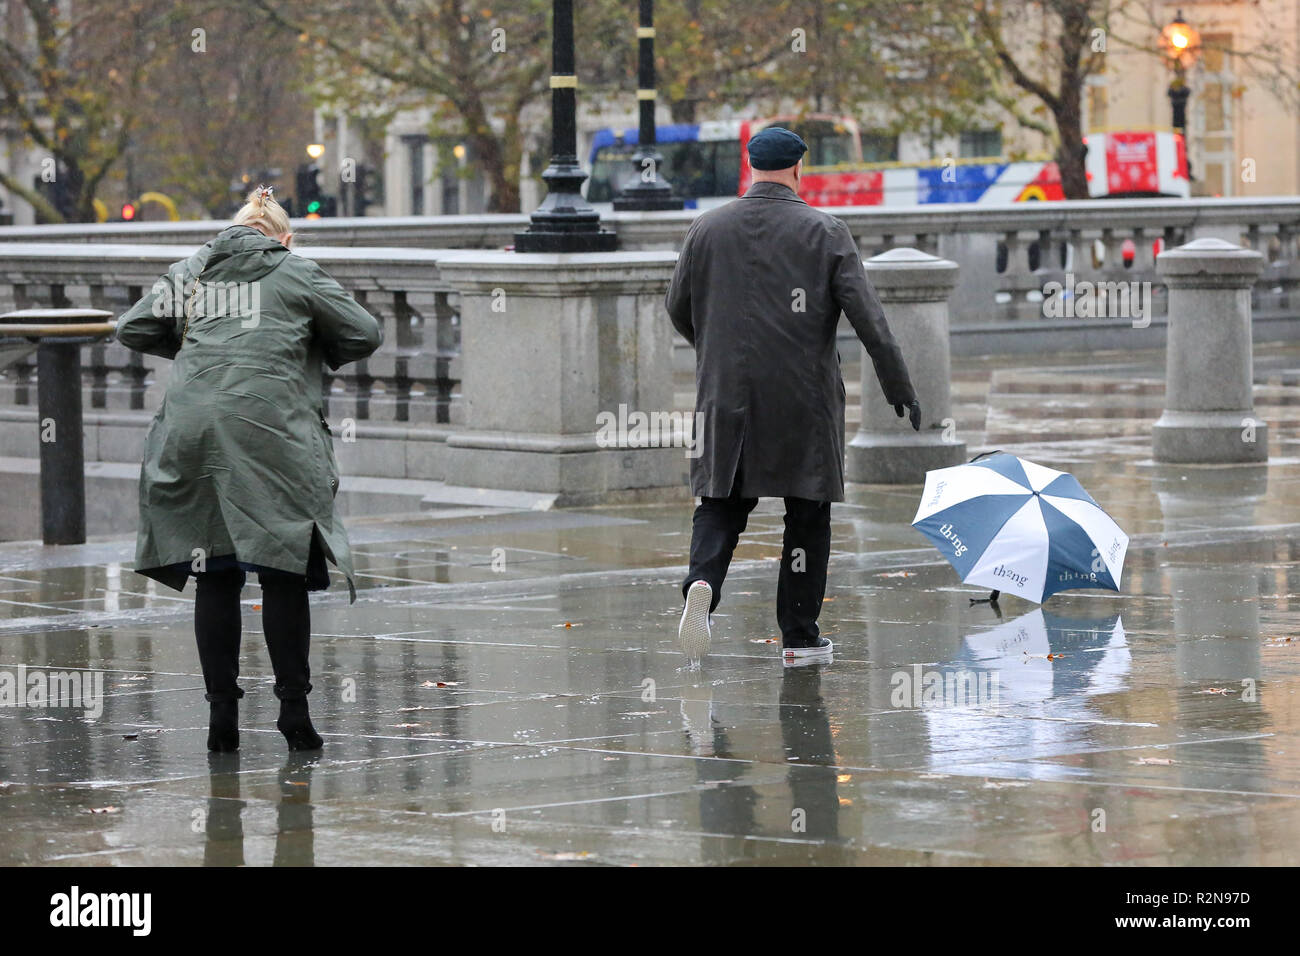 A man is seen running after an umbrella during a heavy rainfall.  According to The Met Office, snow and sleet is forecasted in Britain this week as temperatures plummet. Stock Photo